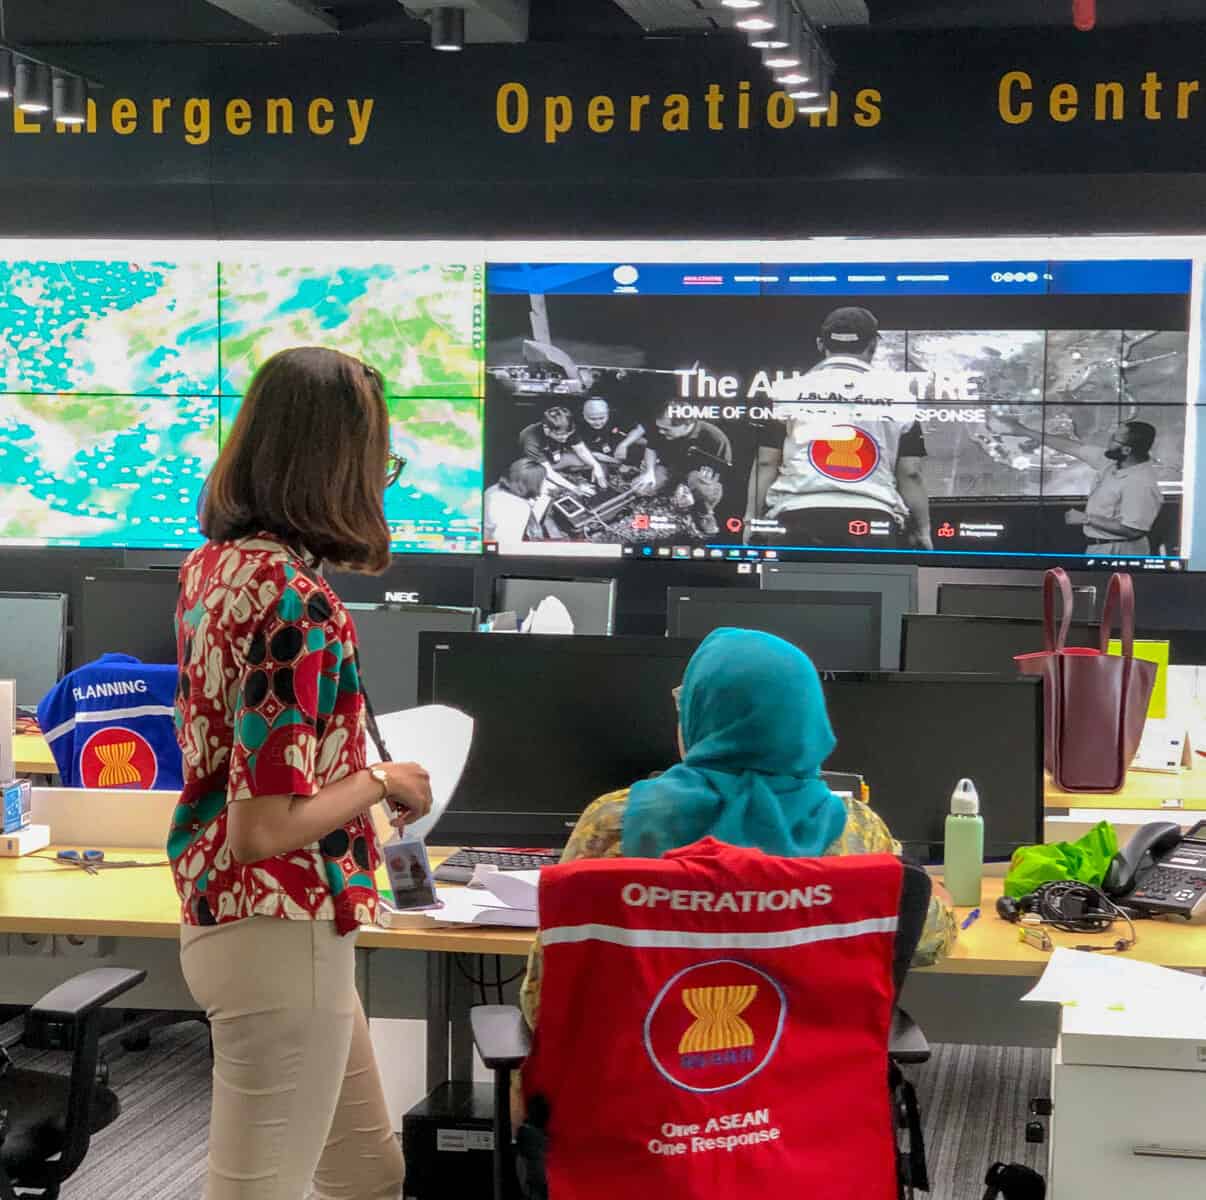 DMRS Training at AHA Centre, two users at the Emergency Operations Center